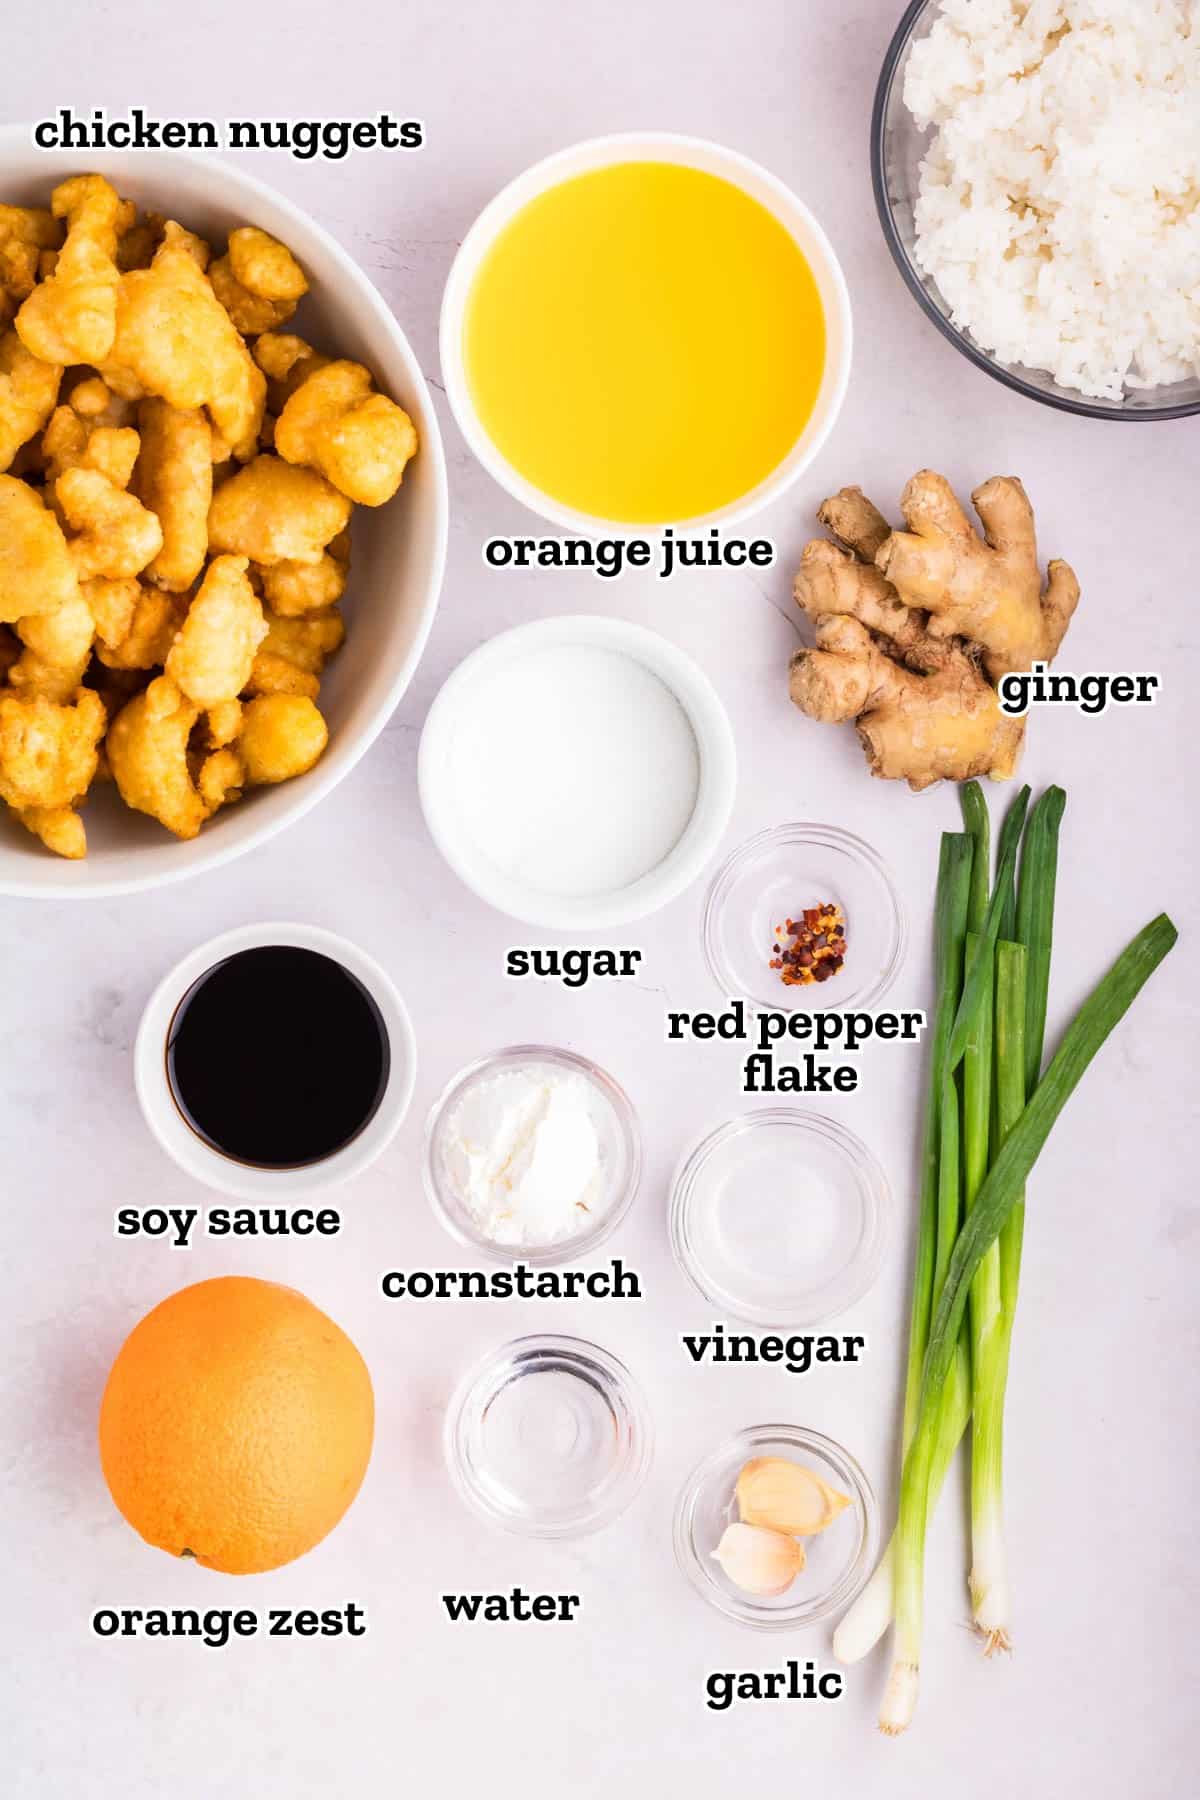 Ingredients need for Chinese orange chicken recipes.